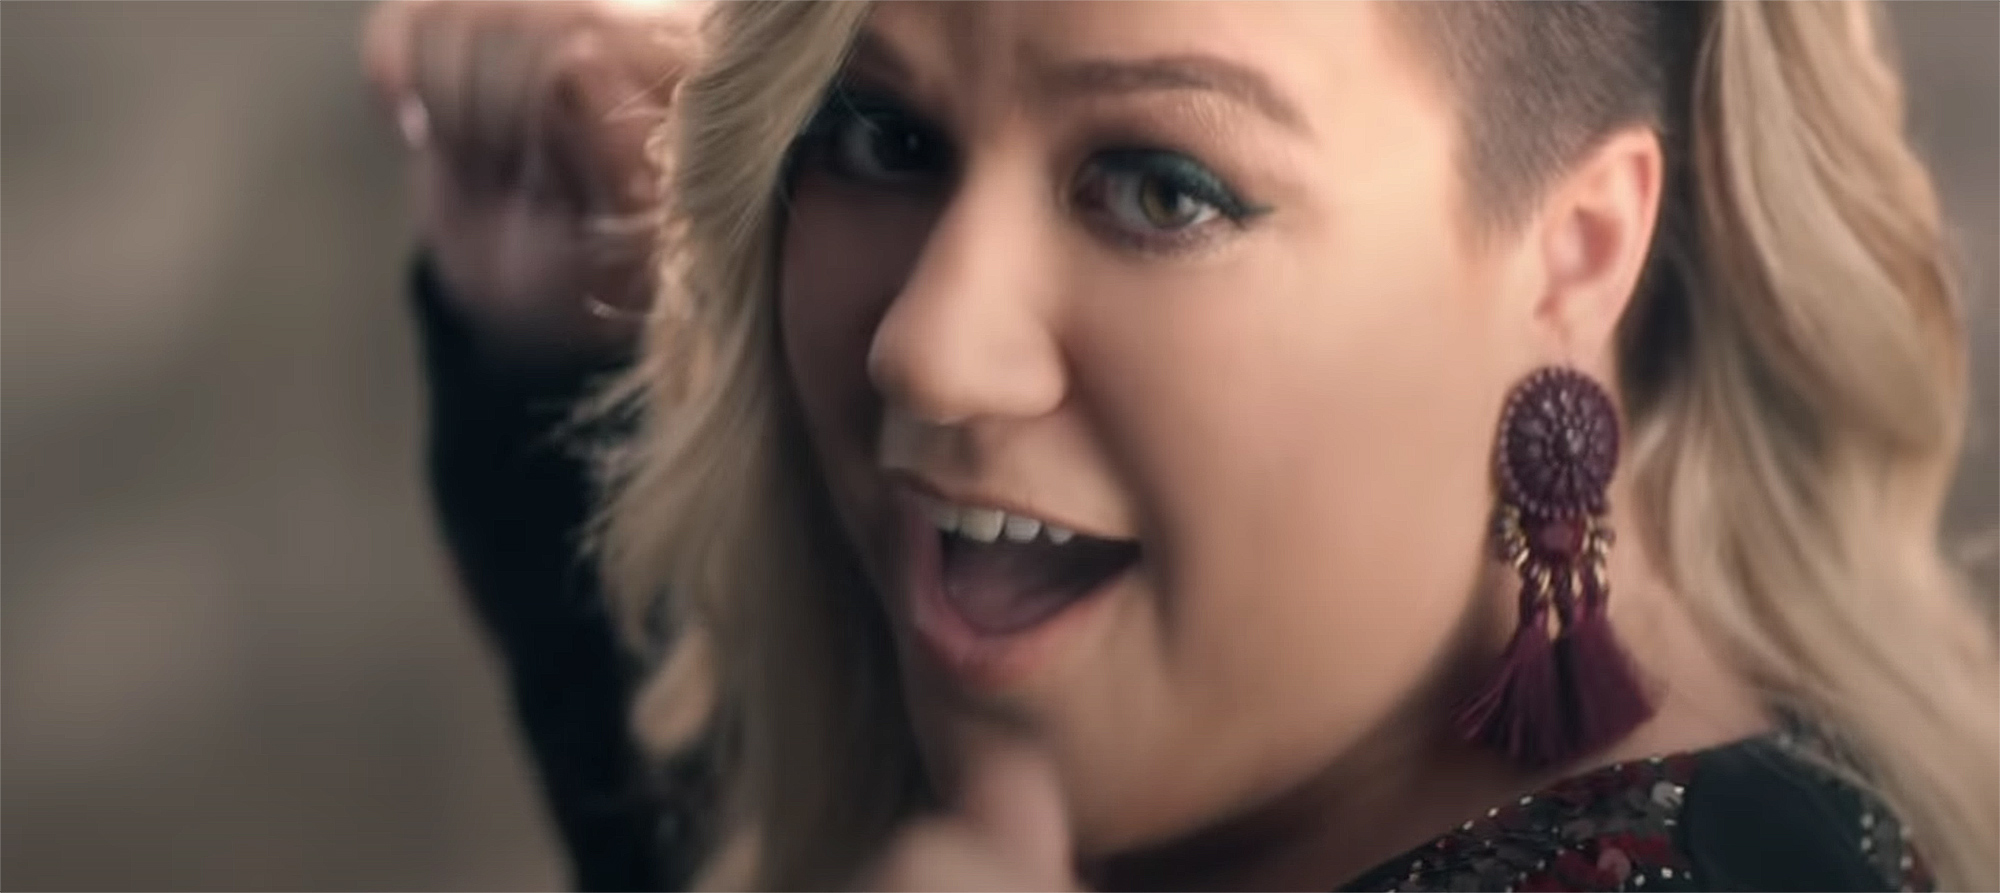 Kelly Clarkson’s Most Uplifting Songs About Female Empowerment